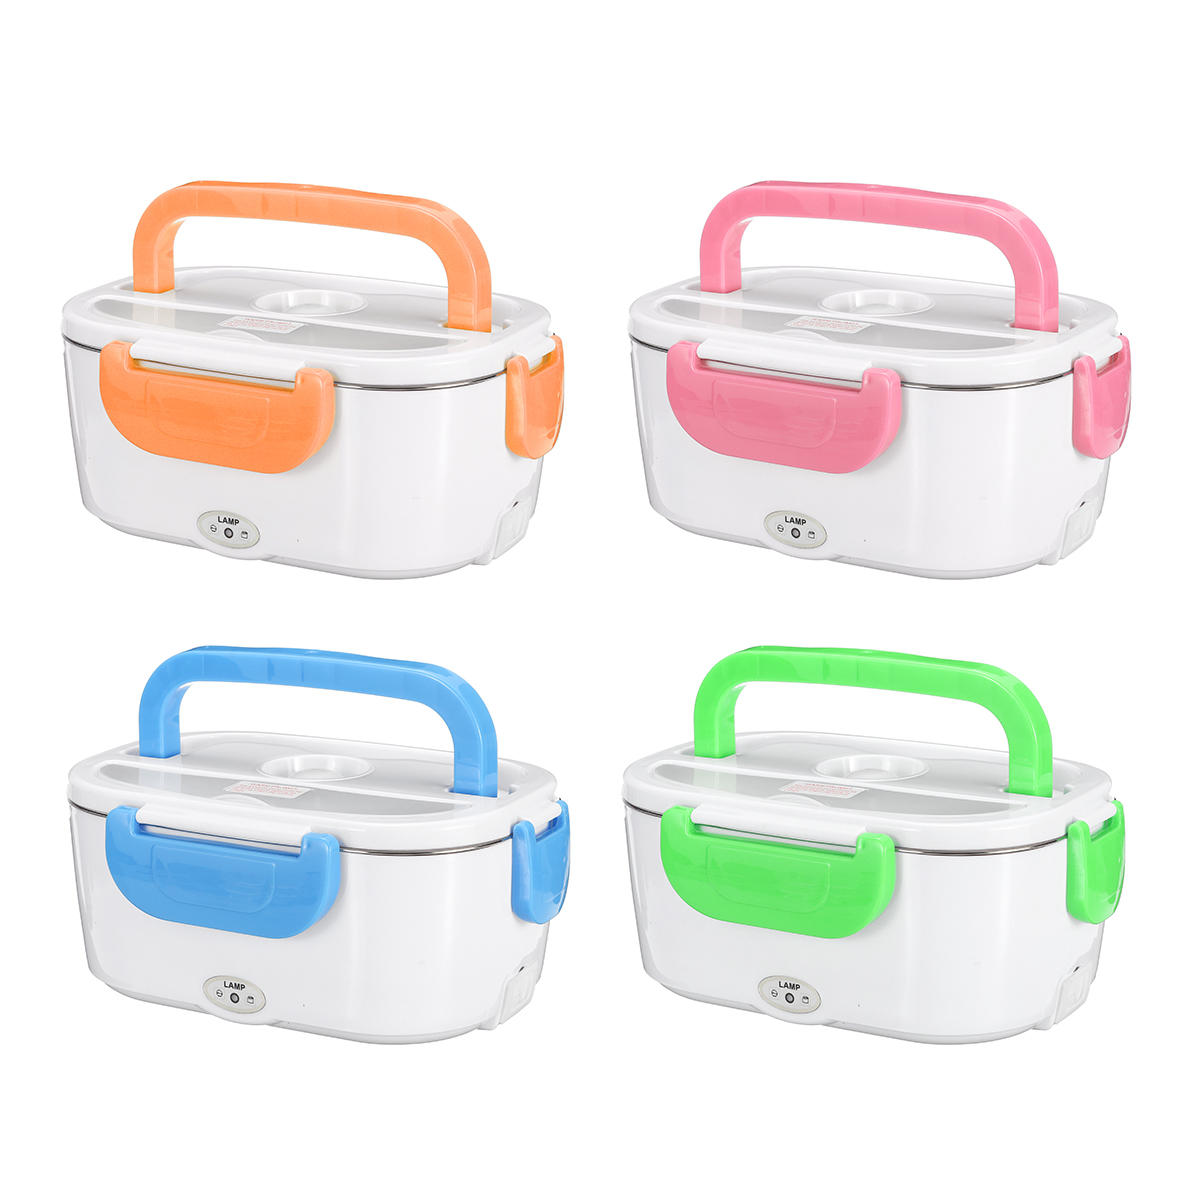 US Plug Stainless Steel 40W Electric Heated Lunch Box Heating Bento Box Food Warmer with Spoon Car Lunch Box